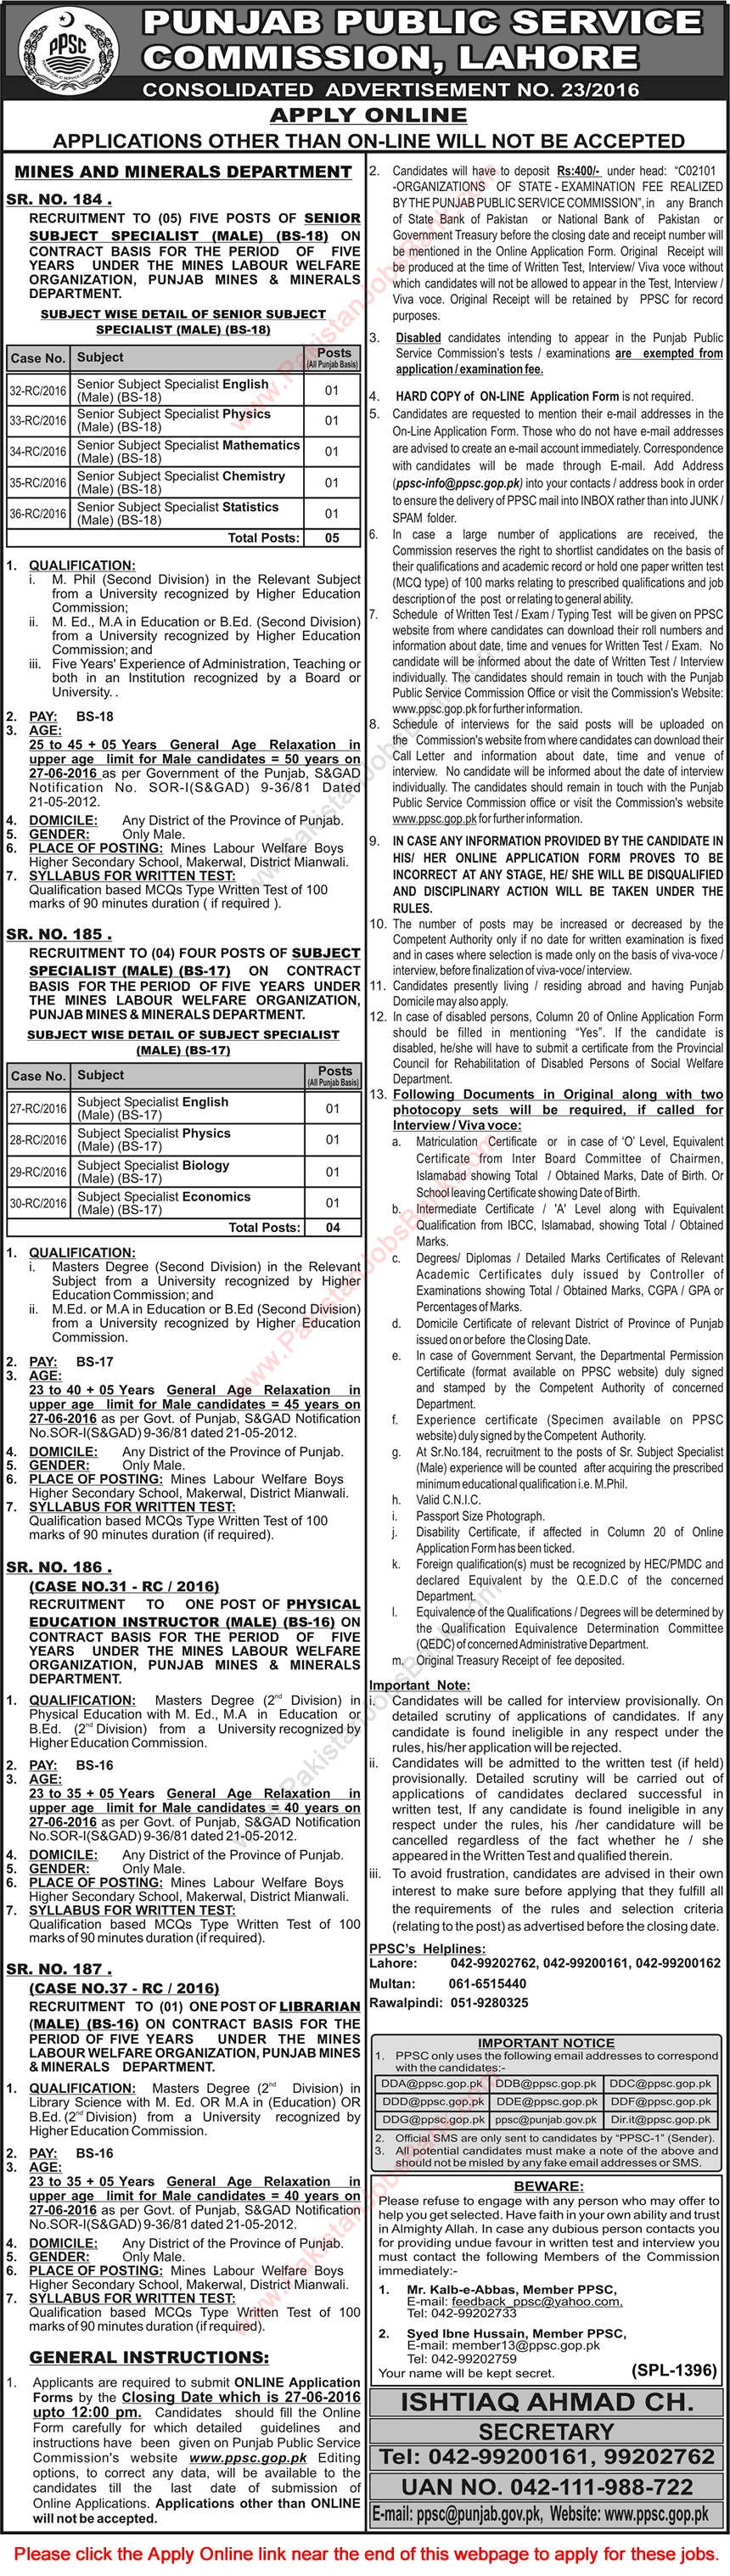 PPSC Jobs June 2016 Consolidated Advertisement No 23/2016 Apply Online Latest